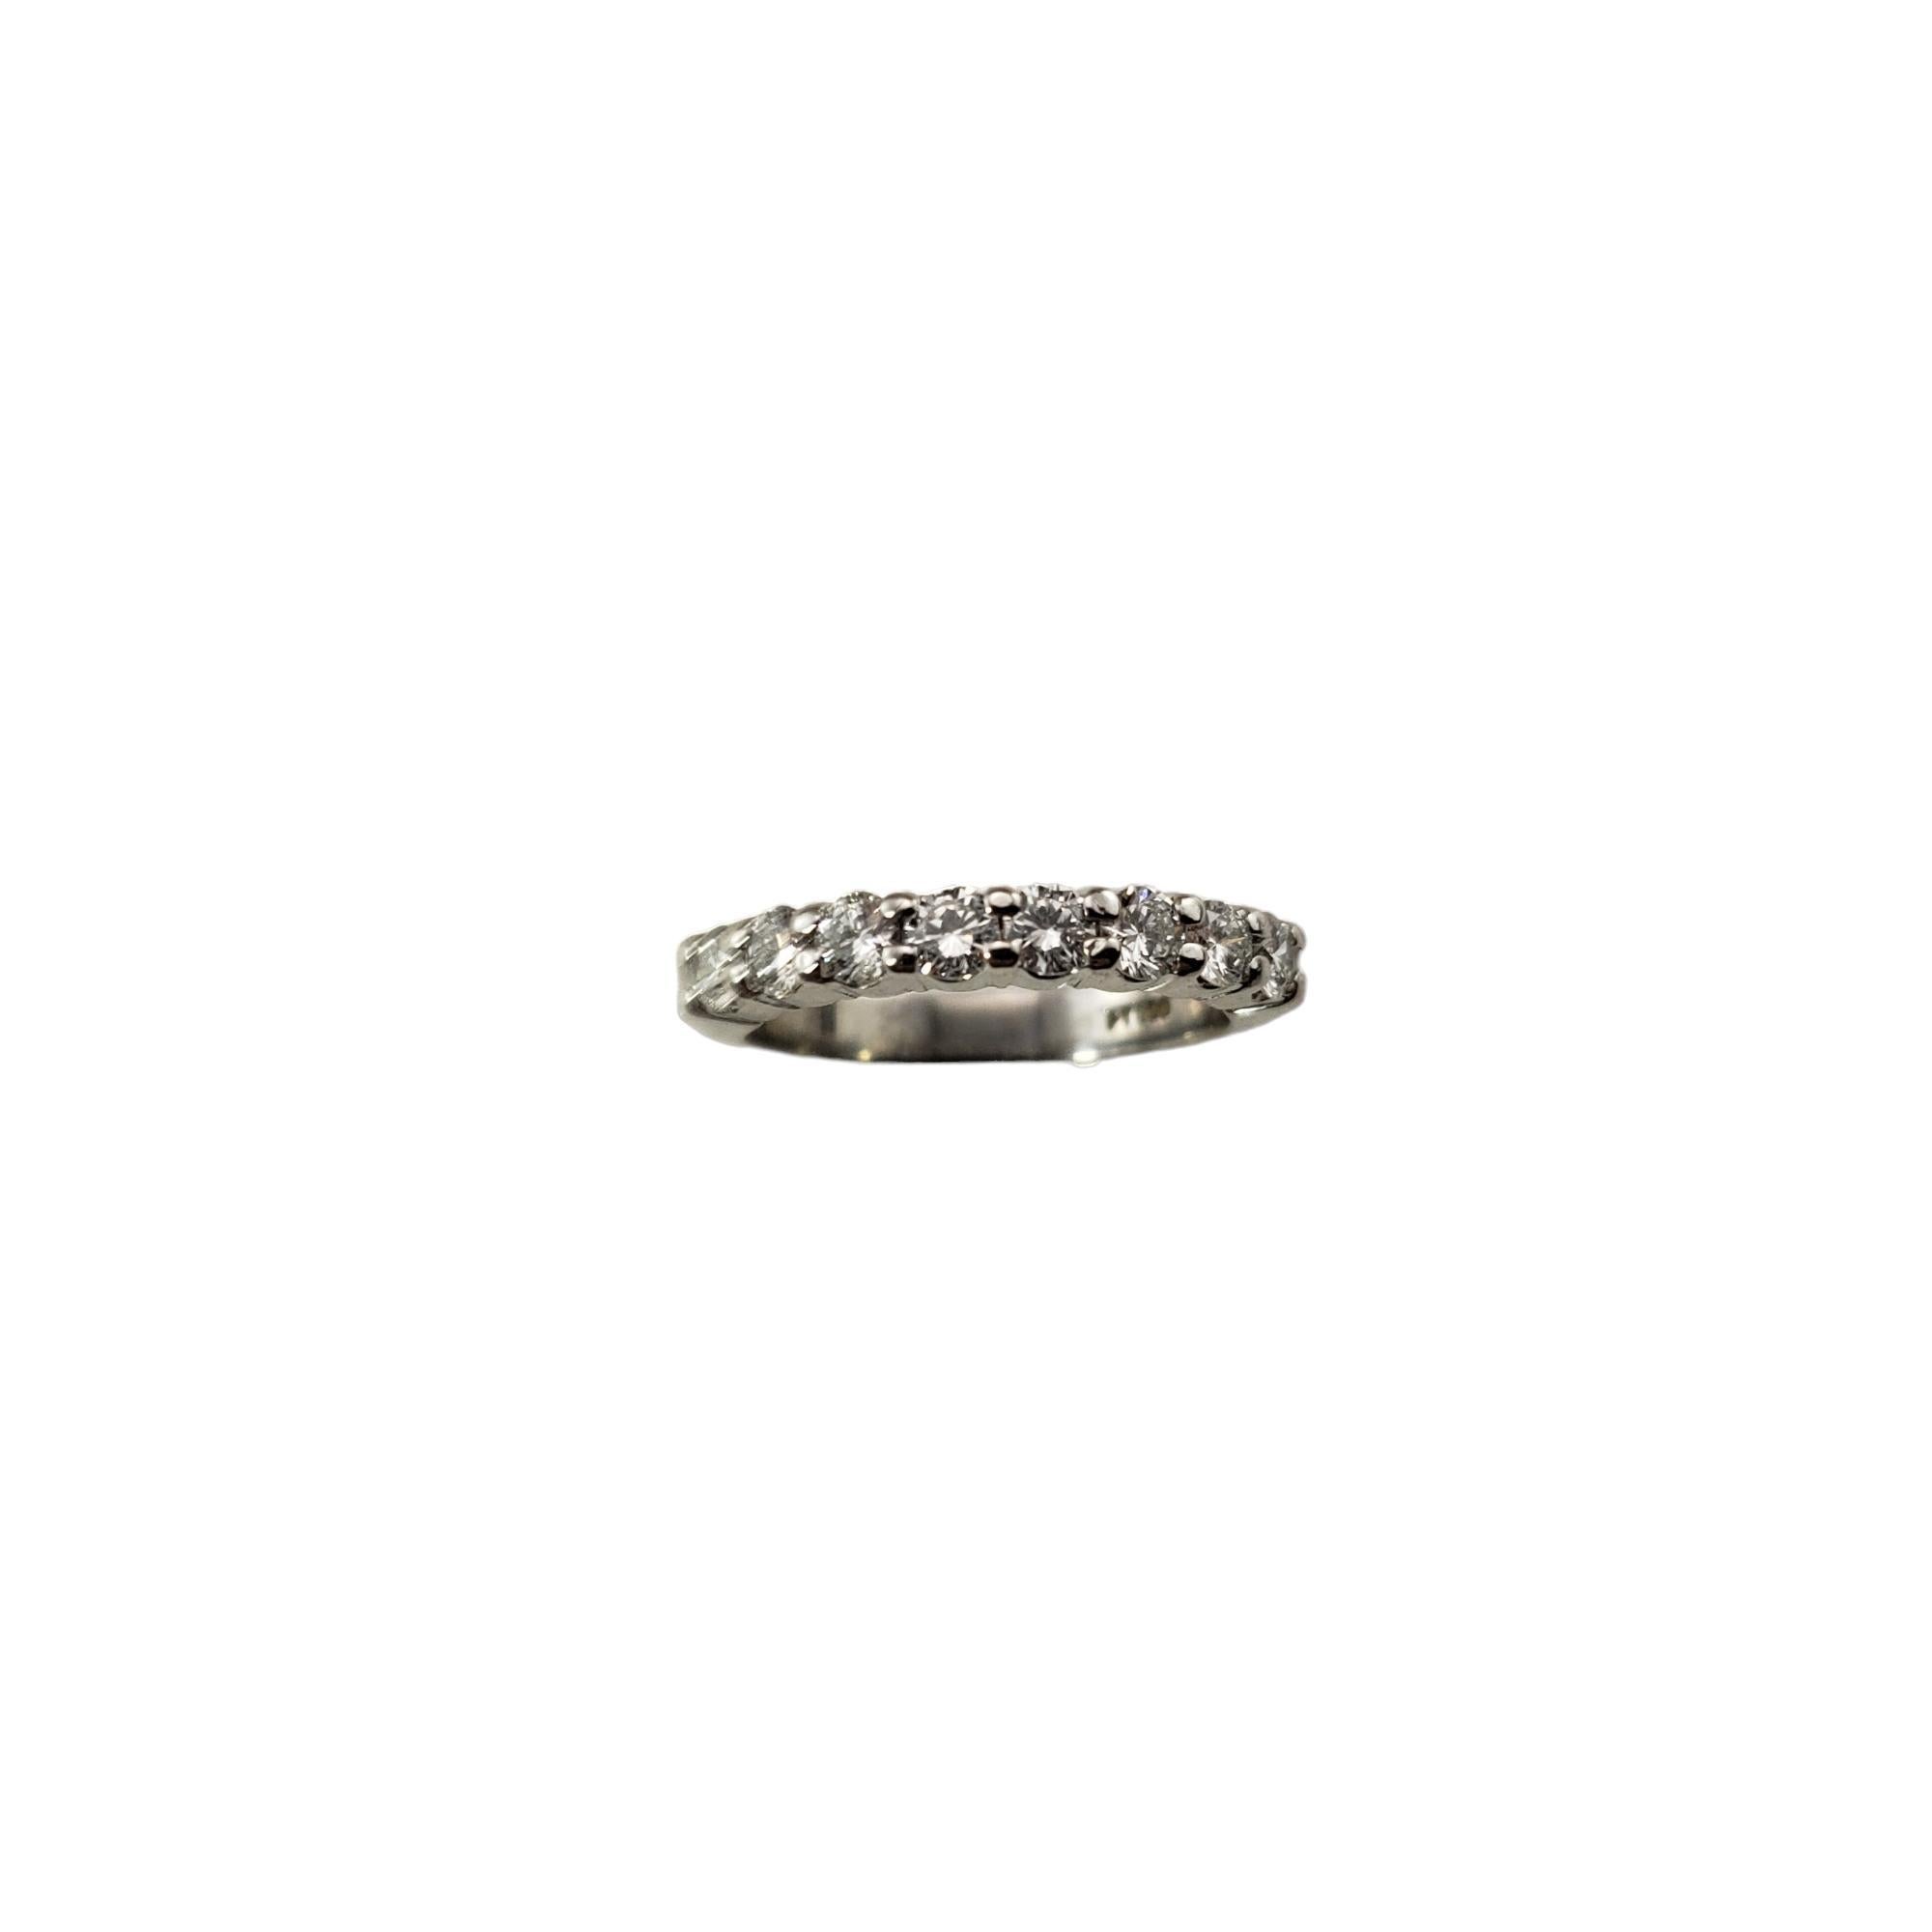 Vintage Platinum Diamond Wedding Band Ring Size 4.5-

This sparkling band features eight round brilliant cut diamonds* set in classic platinum.  Width: 3 mm.  

*Chip noted to one stone not visible to naked eye.

Approximate total diamond weight: